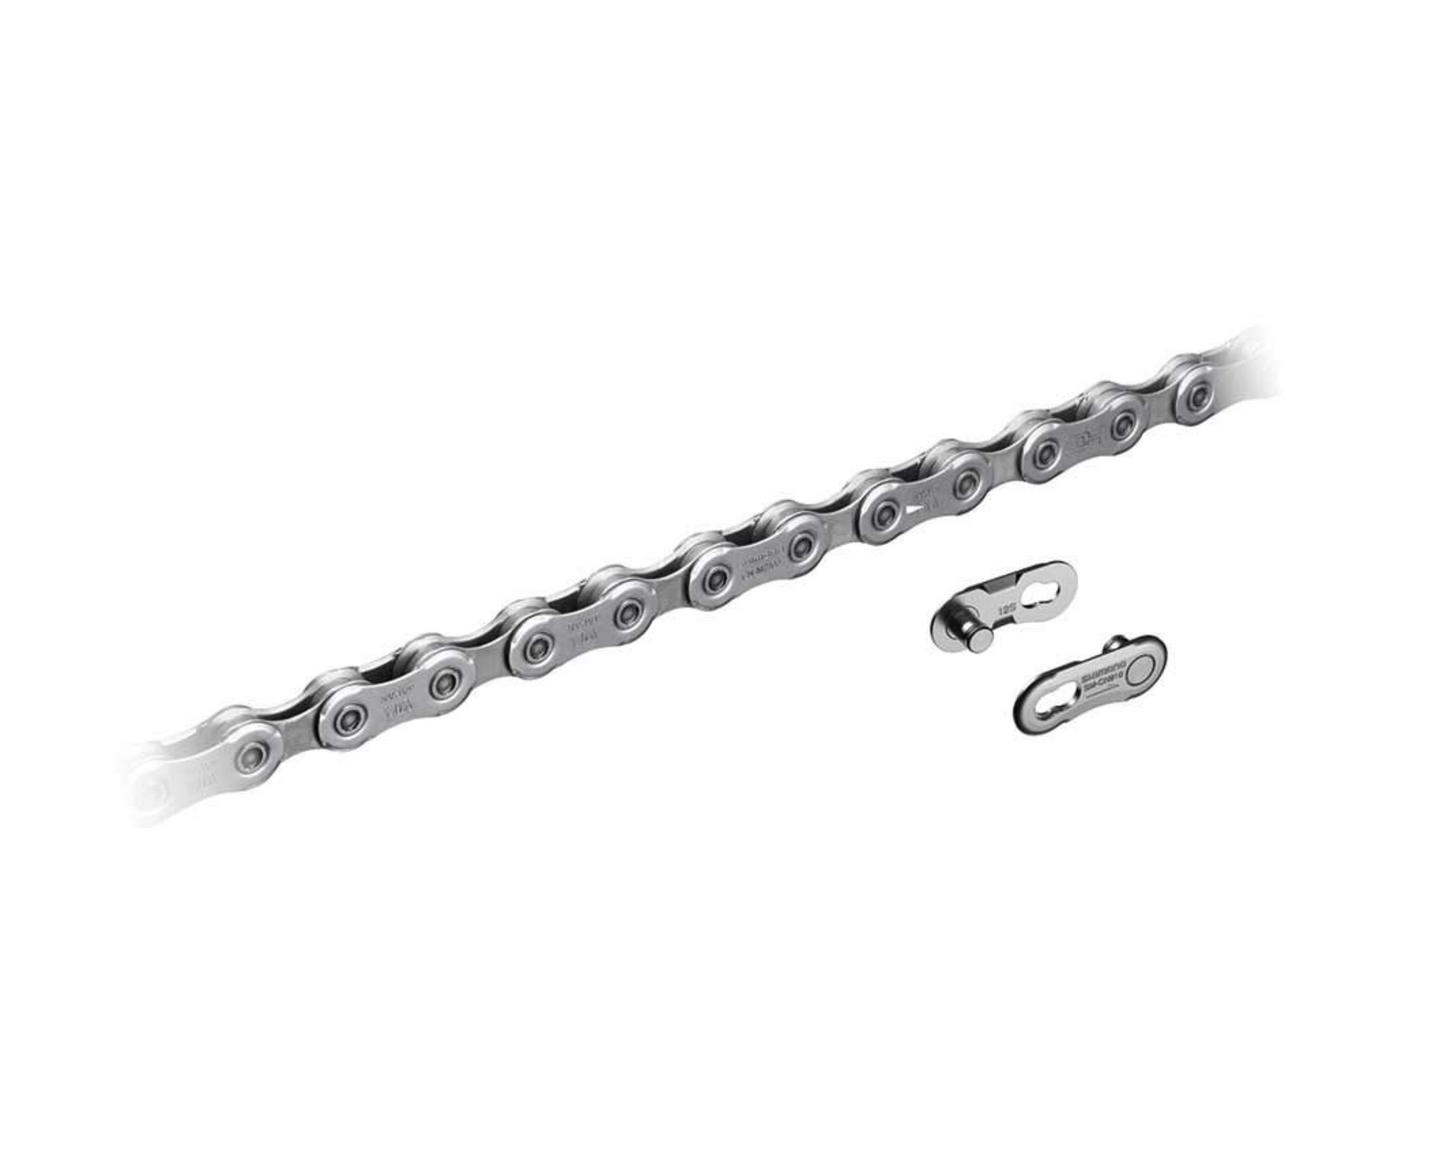 Shimano SLX Chain CN-M7100 with Quick Link